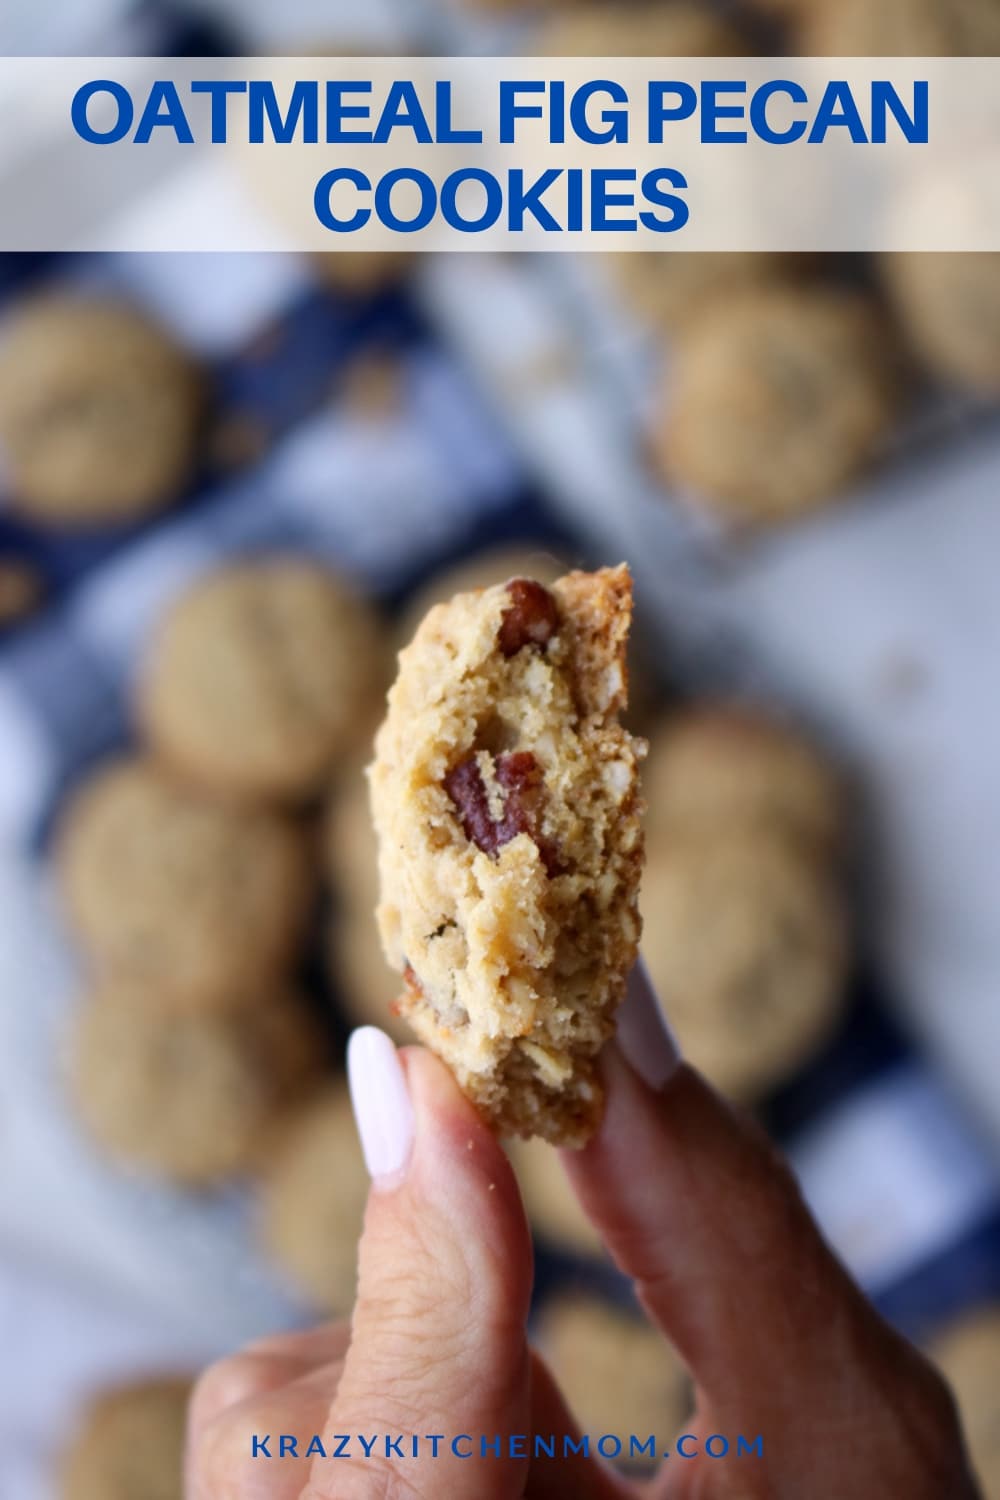 The best oatmeal cookies just got a whole lot better. Crispy brown bottoms and edges with a soft chewy center. Bet you can’t eat just one. via @krazykitchenmom